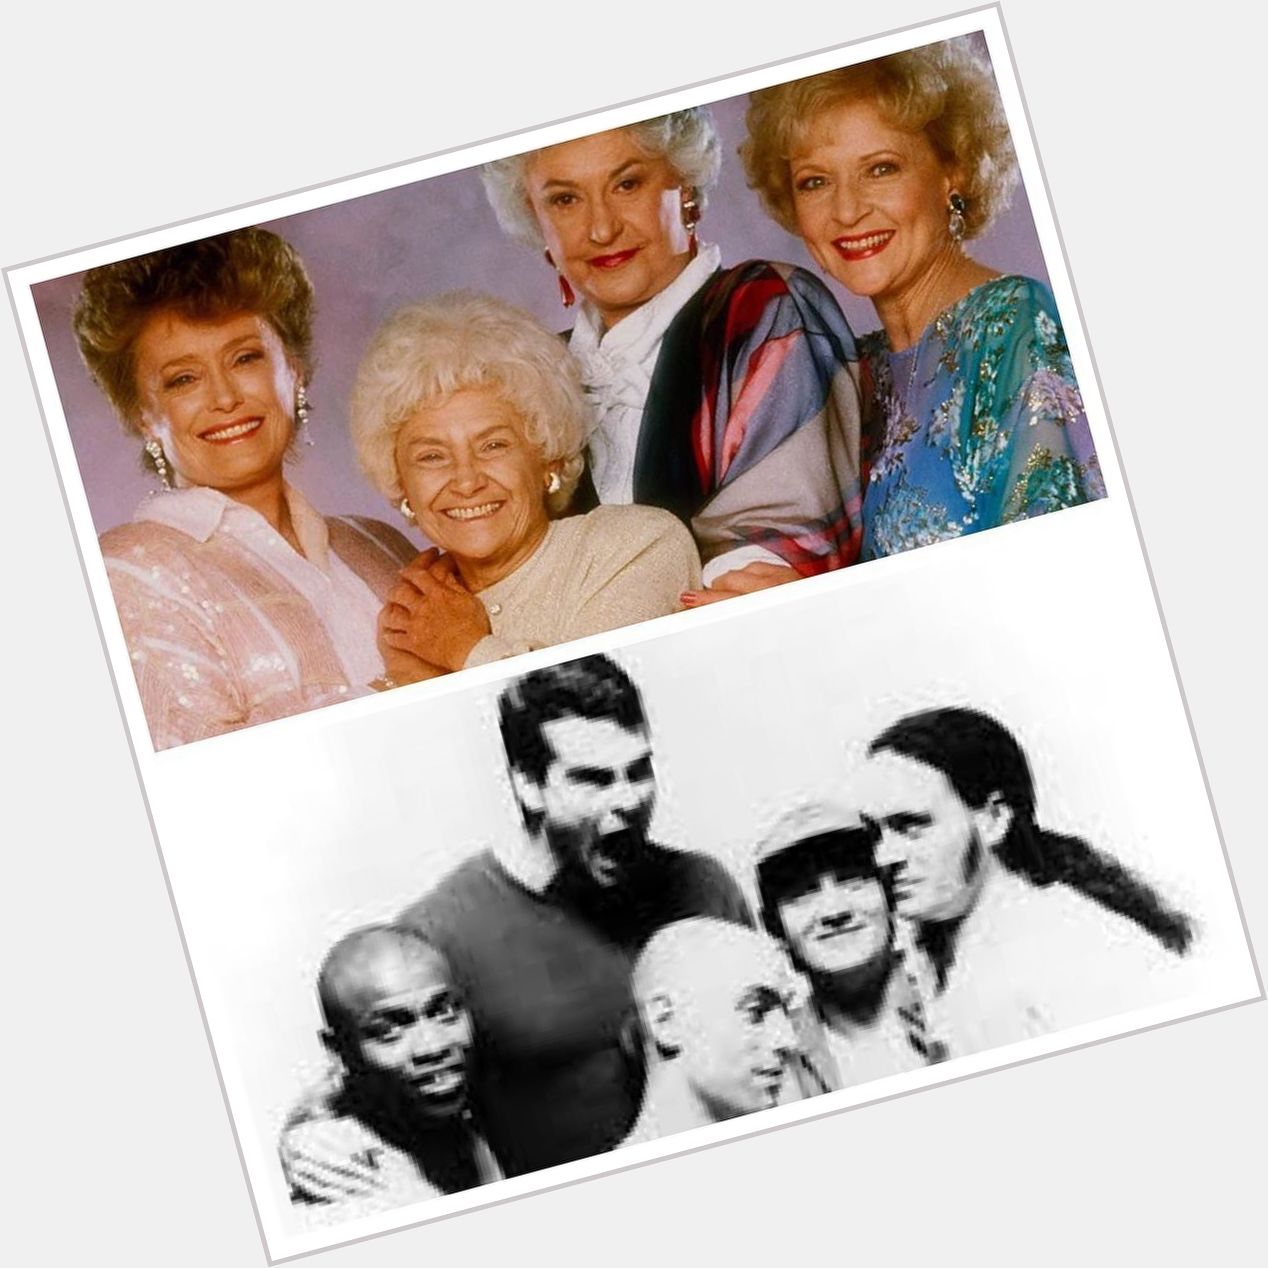 Happy birthday to Henry Rollins & also happy premiere day to The Golden Girls. Final 